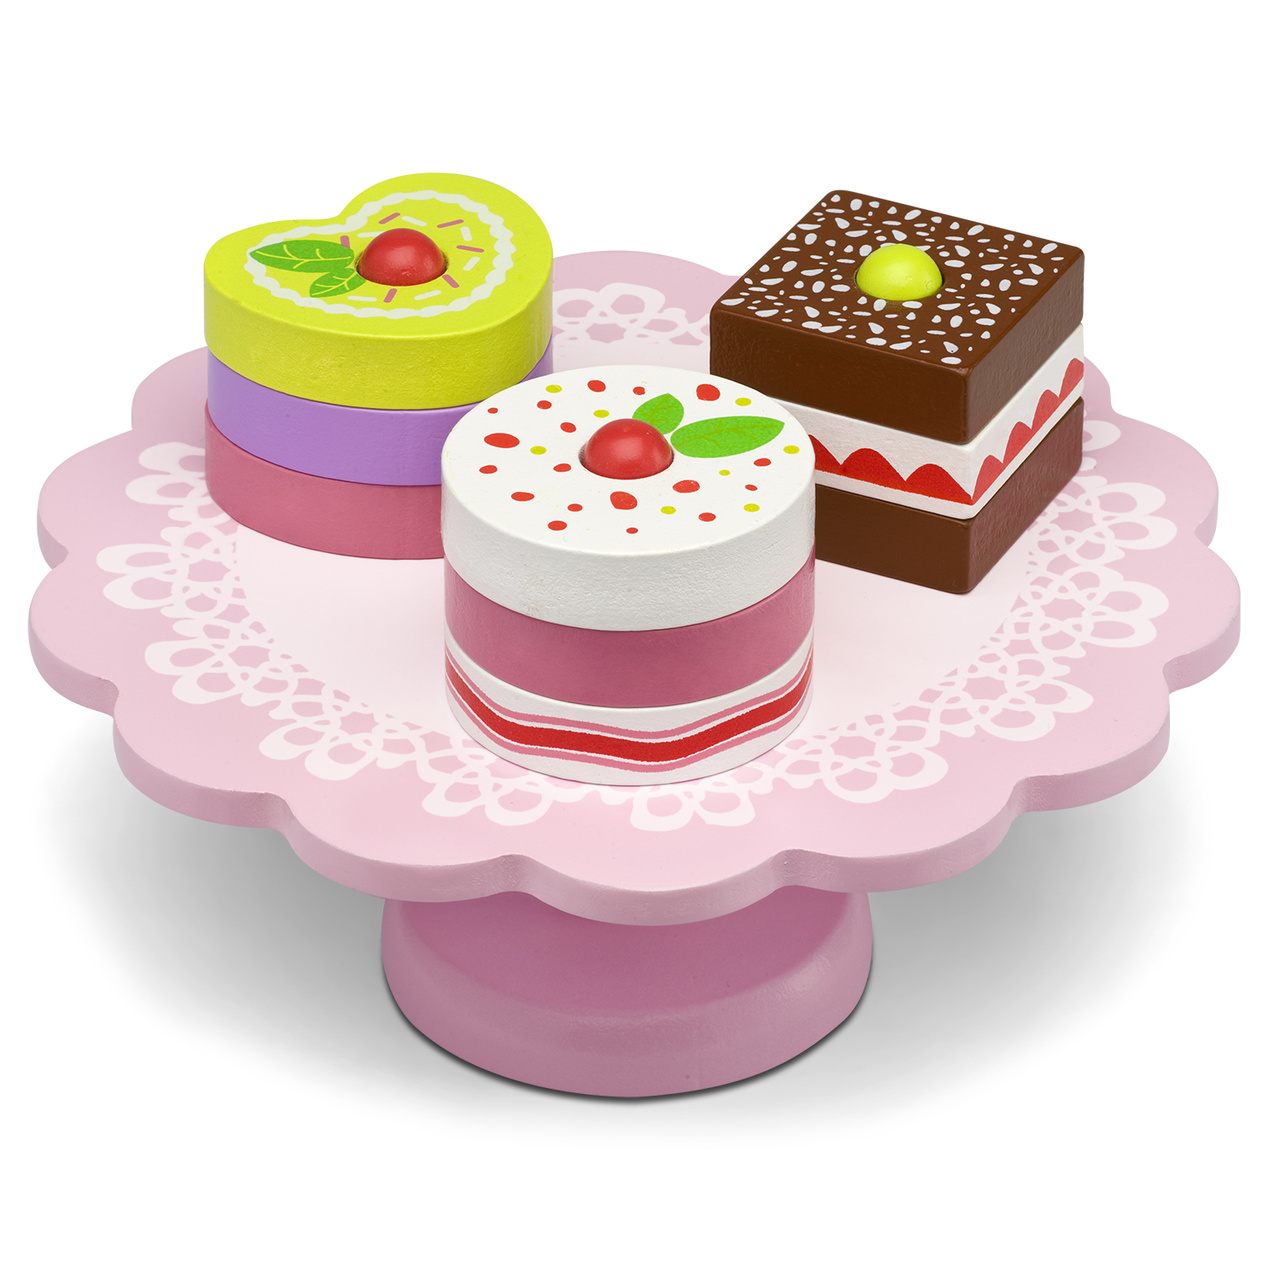 Play kitchens & toy kitchens micki cake stand with toy cakes